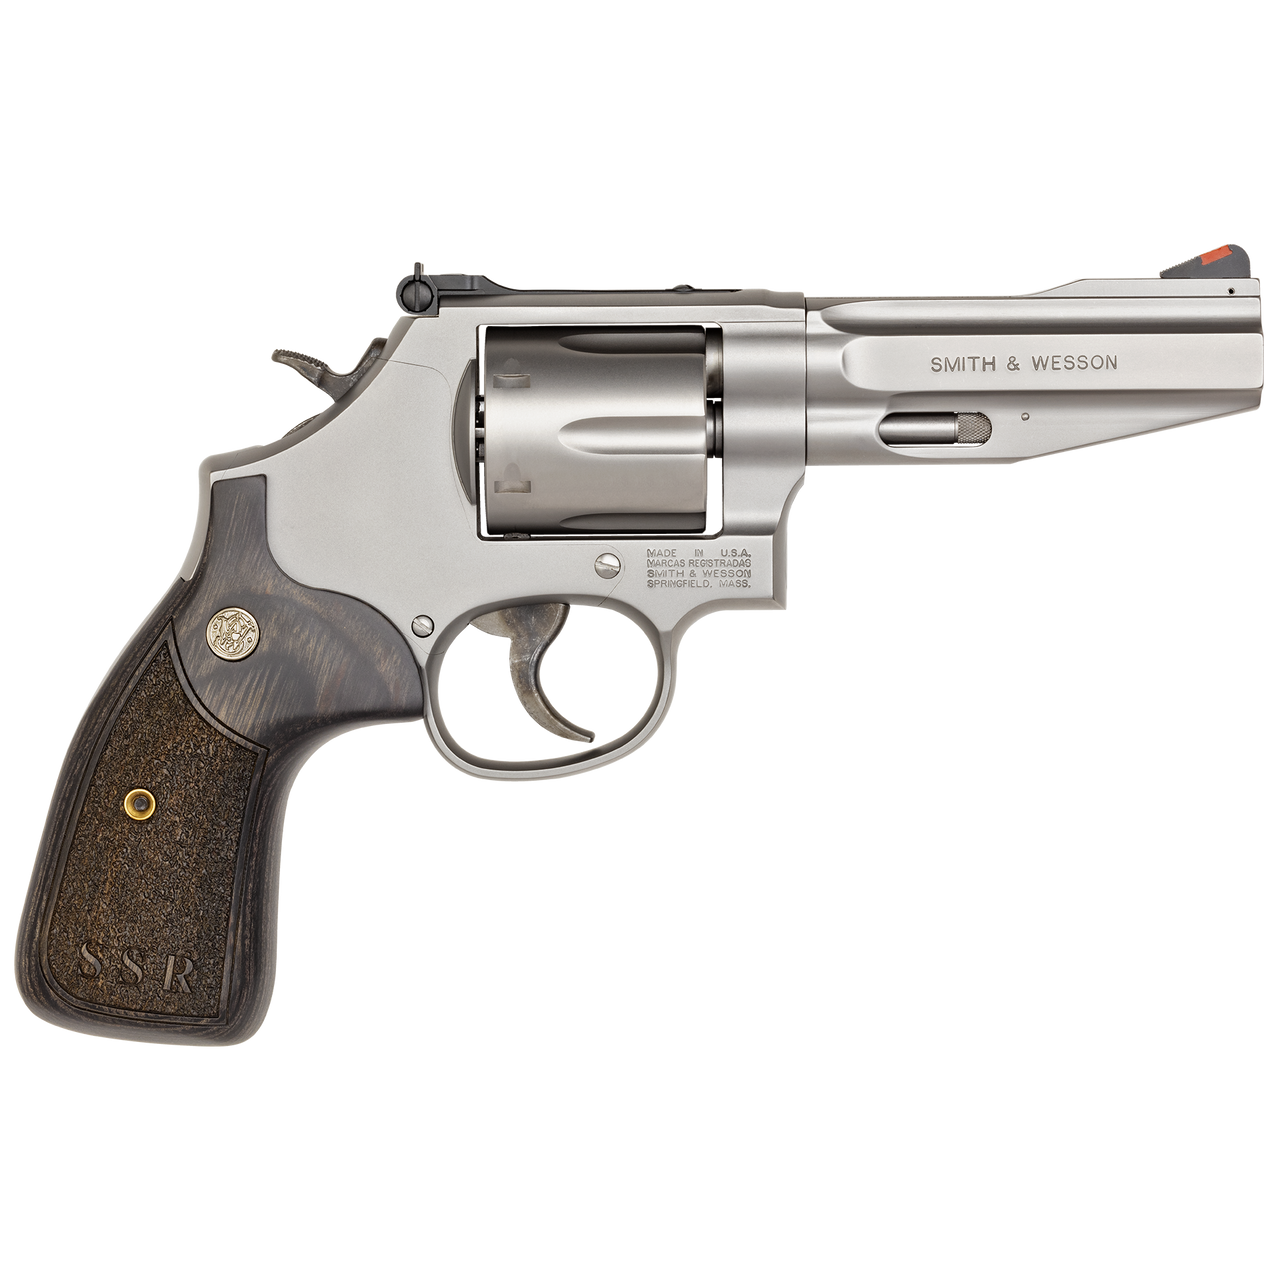 Buy Smith & Wesson Performance Center Pro Series Model 686 SSR Revolver Online